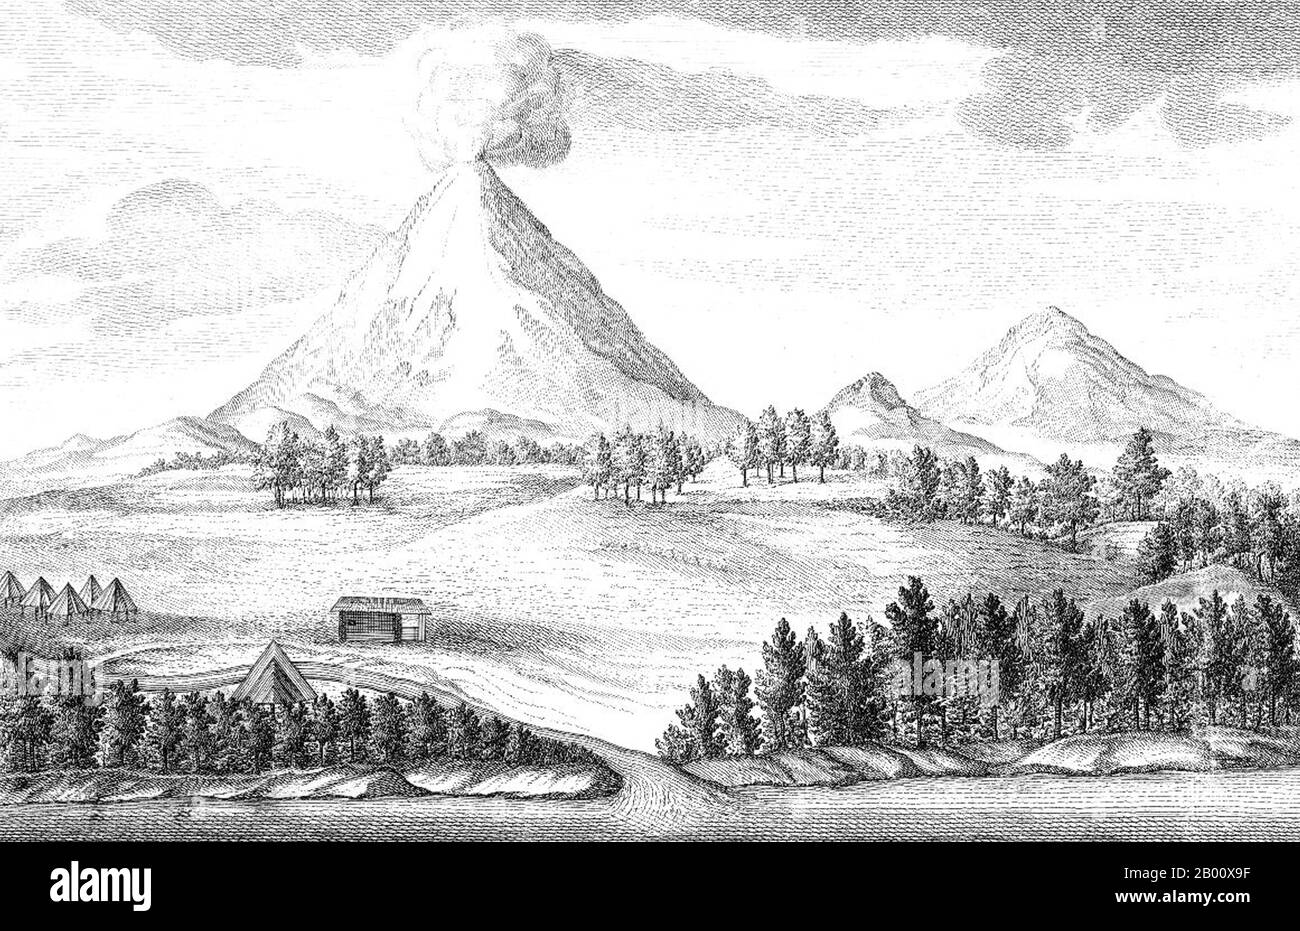 Russia: 'Volcanoes on Kamchatka'. Illustration by Stepan Krasheninnikov (1711-1755), 1755.  An illustration from Stepan Krasheninnikov's 'Account of the Land of Kamchatka'. The Kamchatka Peninsula is a 1,250-kilometer long peninsula in the Russian Far East, with an area of 472,300 km2 (182,400 sq mi). It lies between the Pacific Ocean to the east and the Sea of Okhotsk to the west. Immediately offshore along the Pacific coast of the peninsula runs the 10,500-metre (34,400 ft) deep Kuril-Kamchatka Trench. Stock Photo